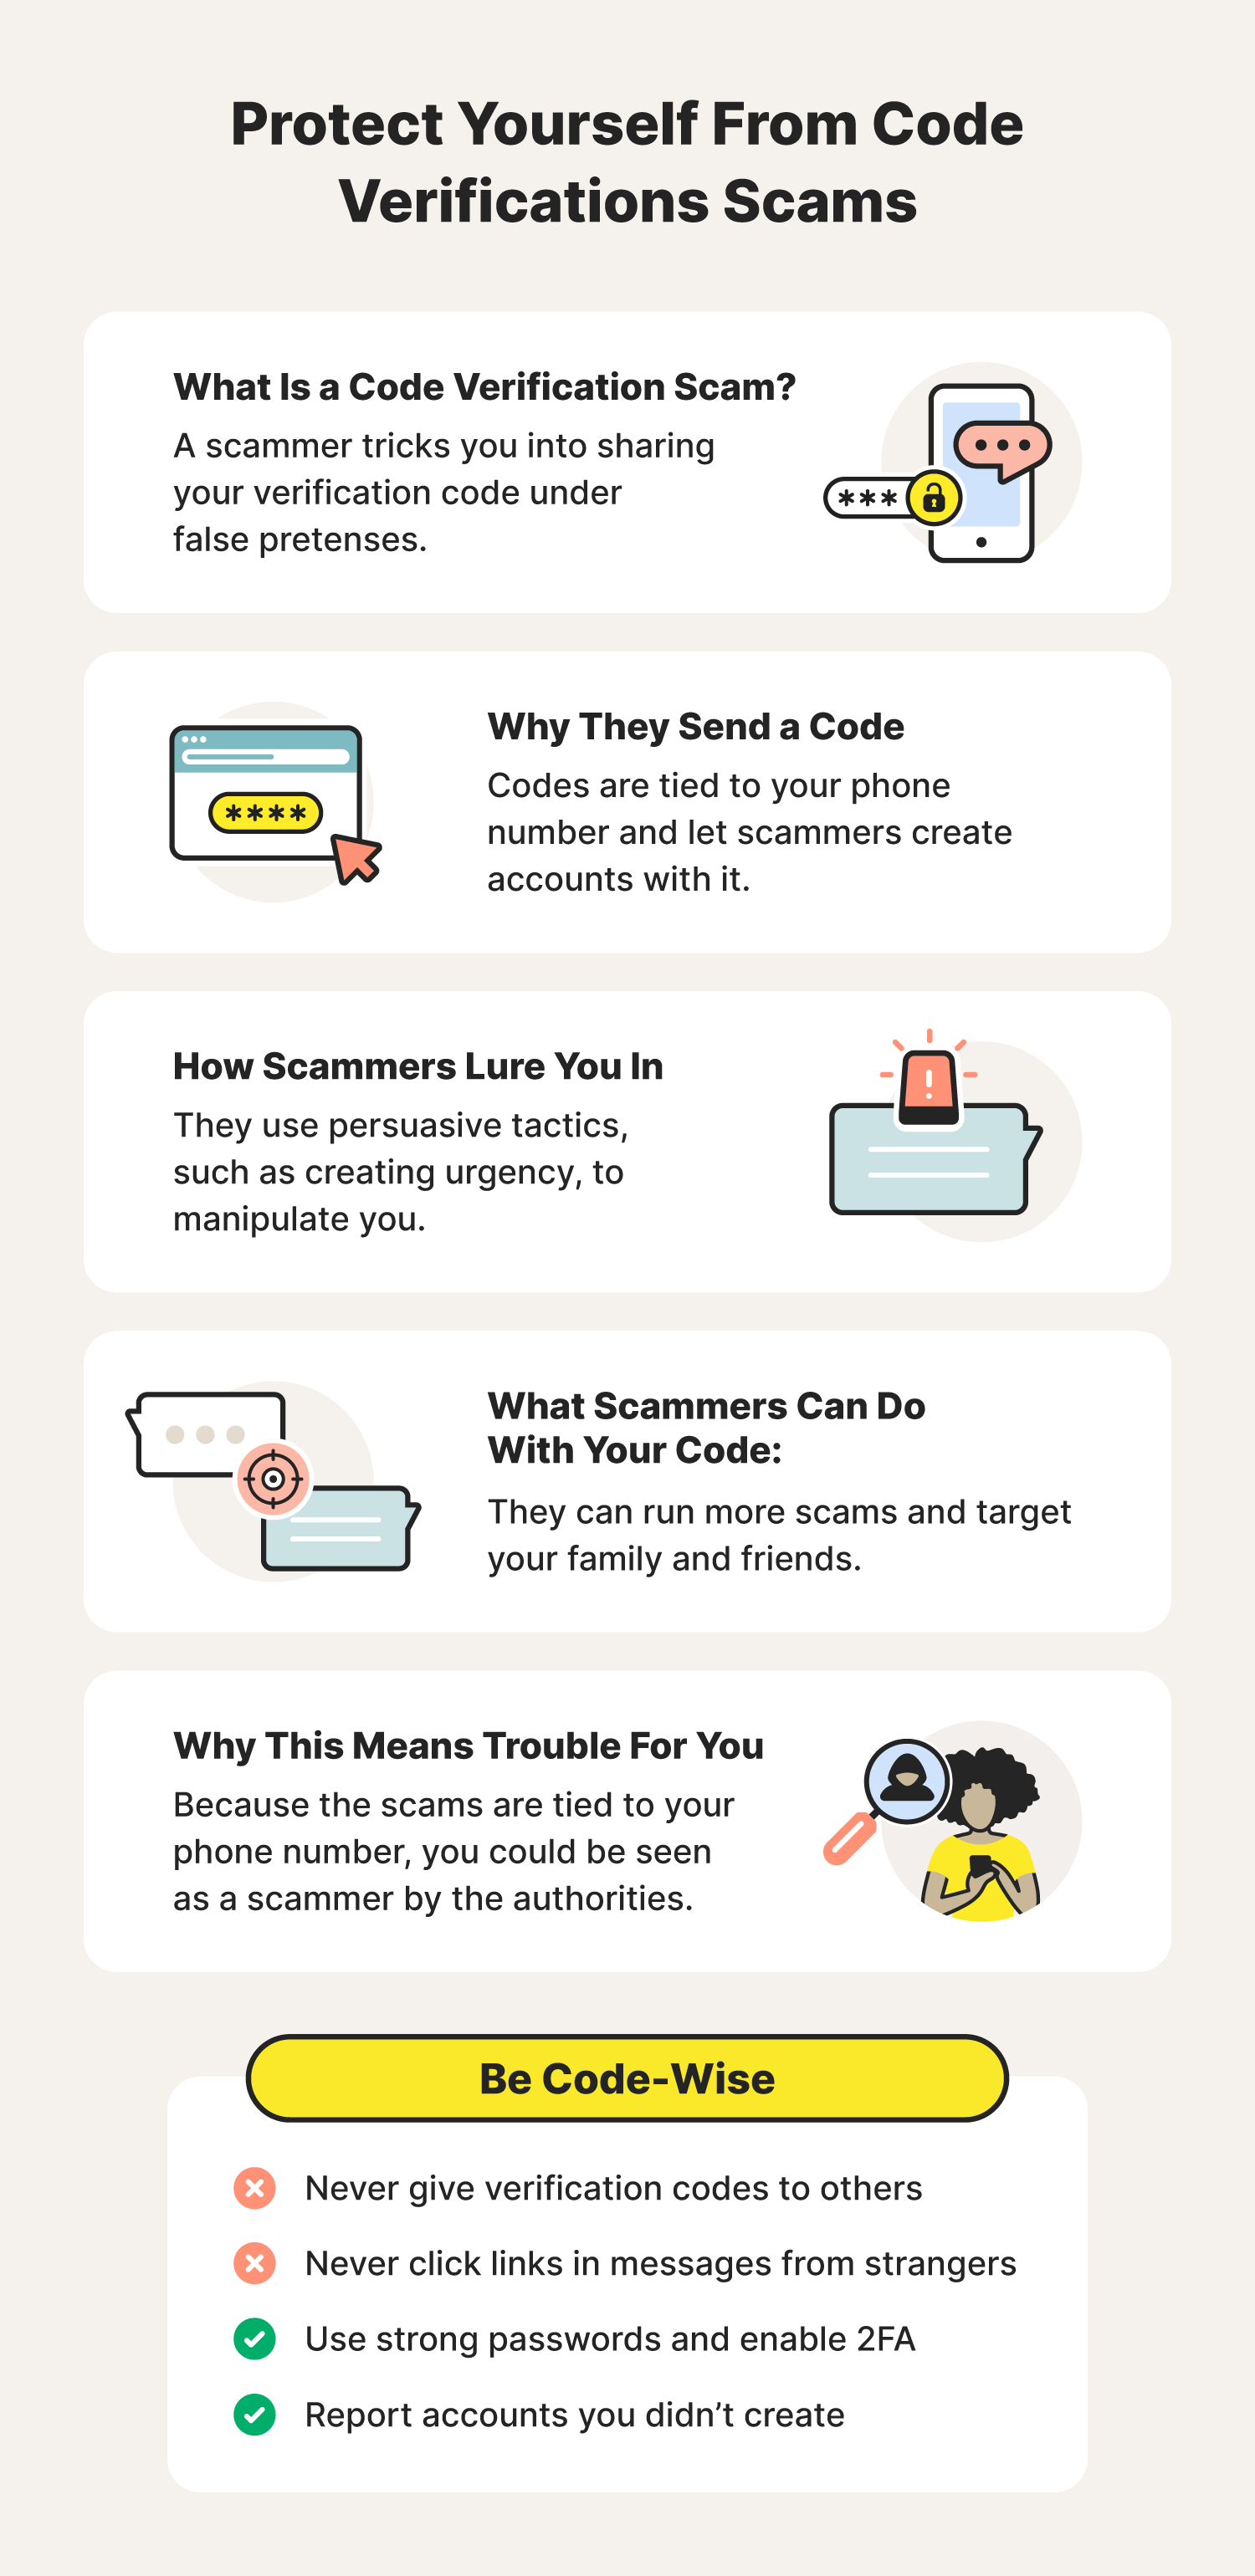 Illustrated chart describing code verification scams and how to avoid them by never sharing codes or clicking unknown links.